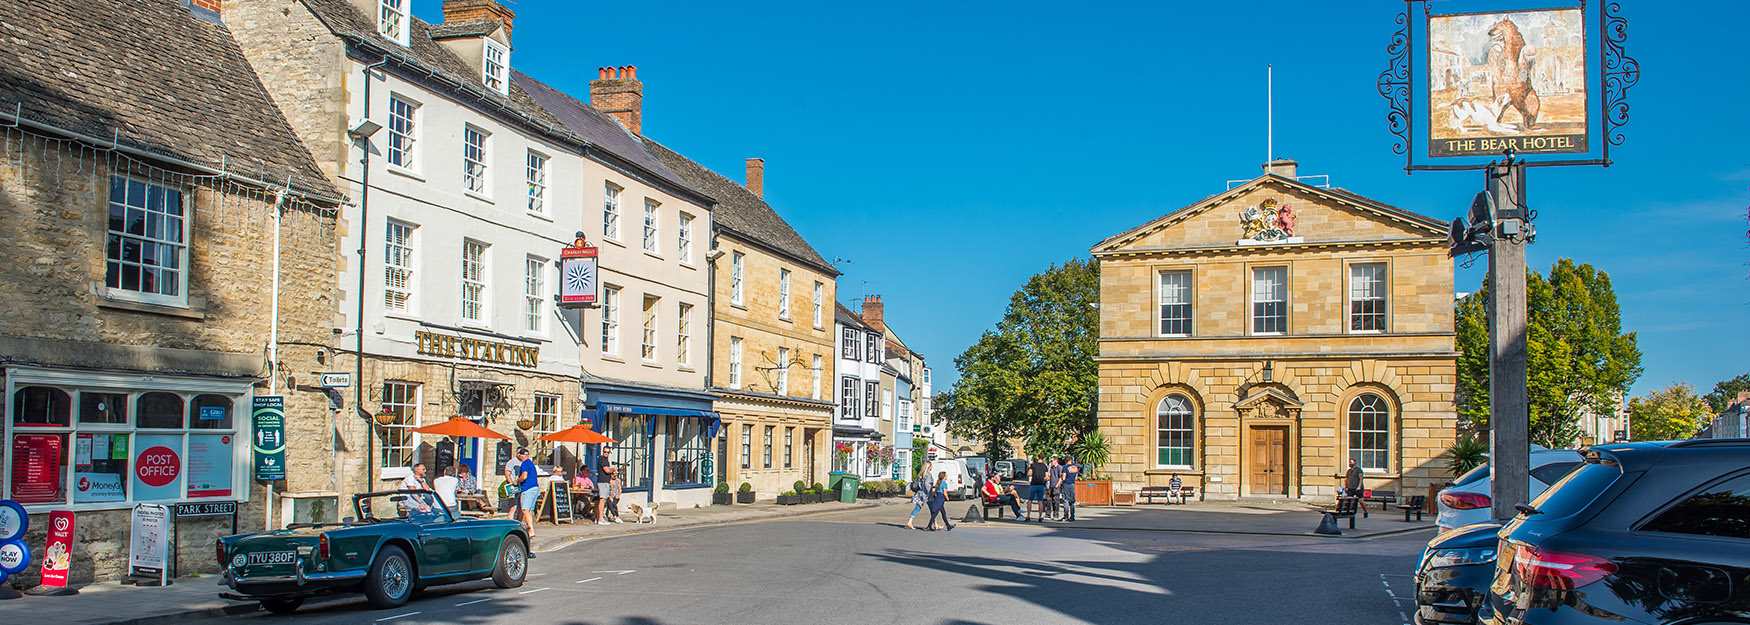 The centre of historic Woodstock (photo by Jay Alice Photographic)